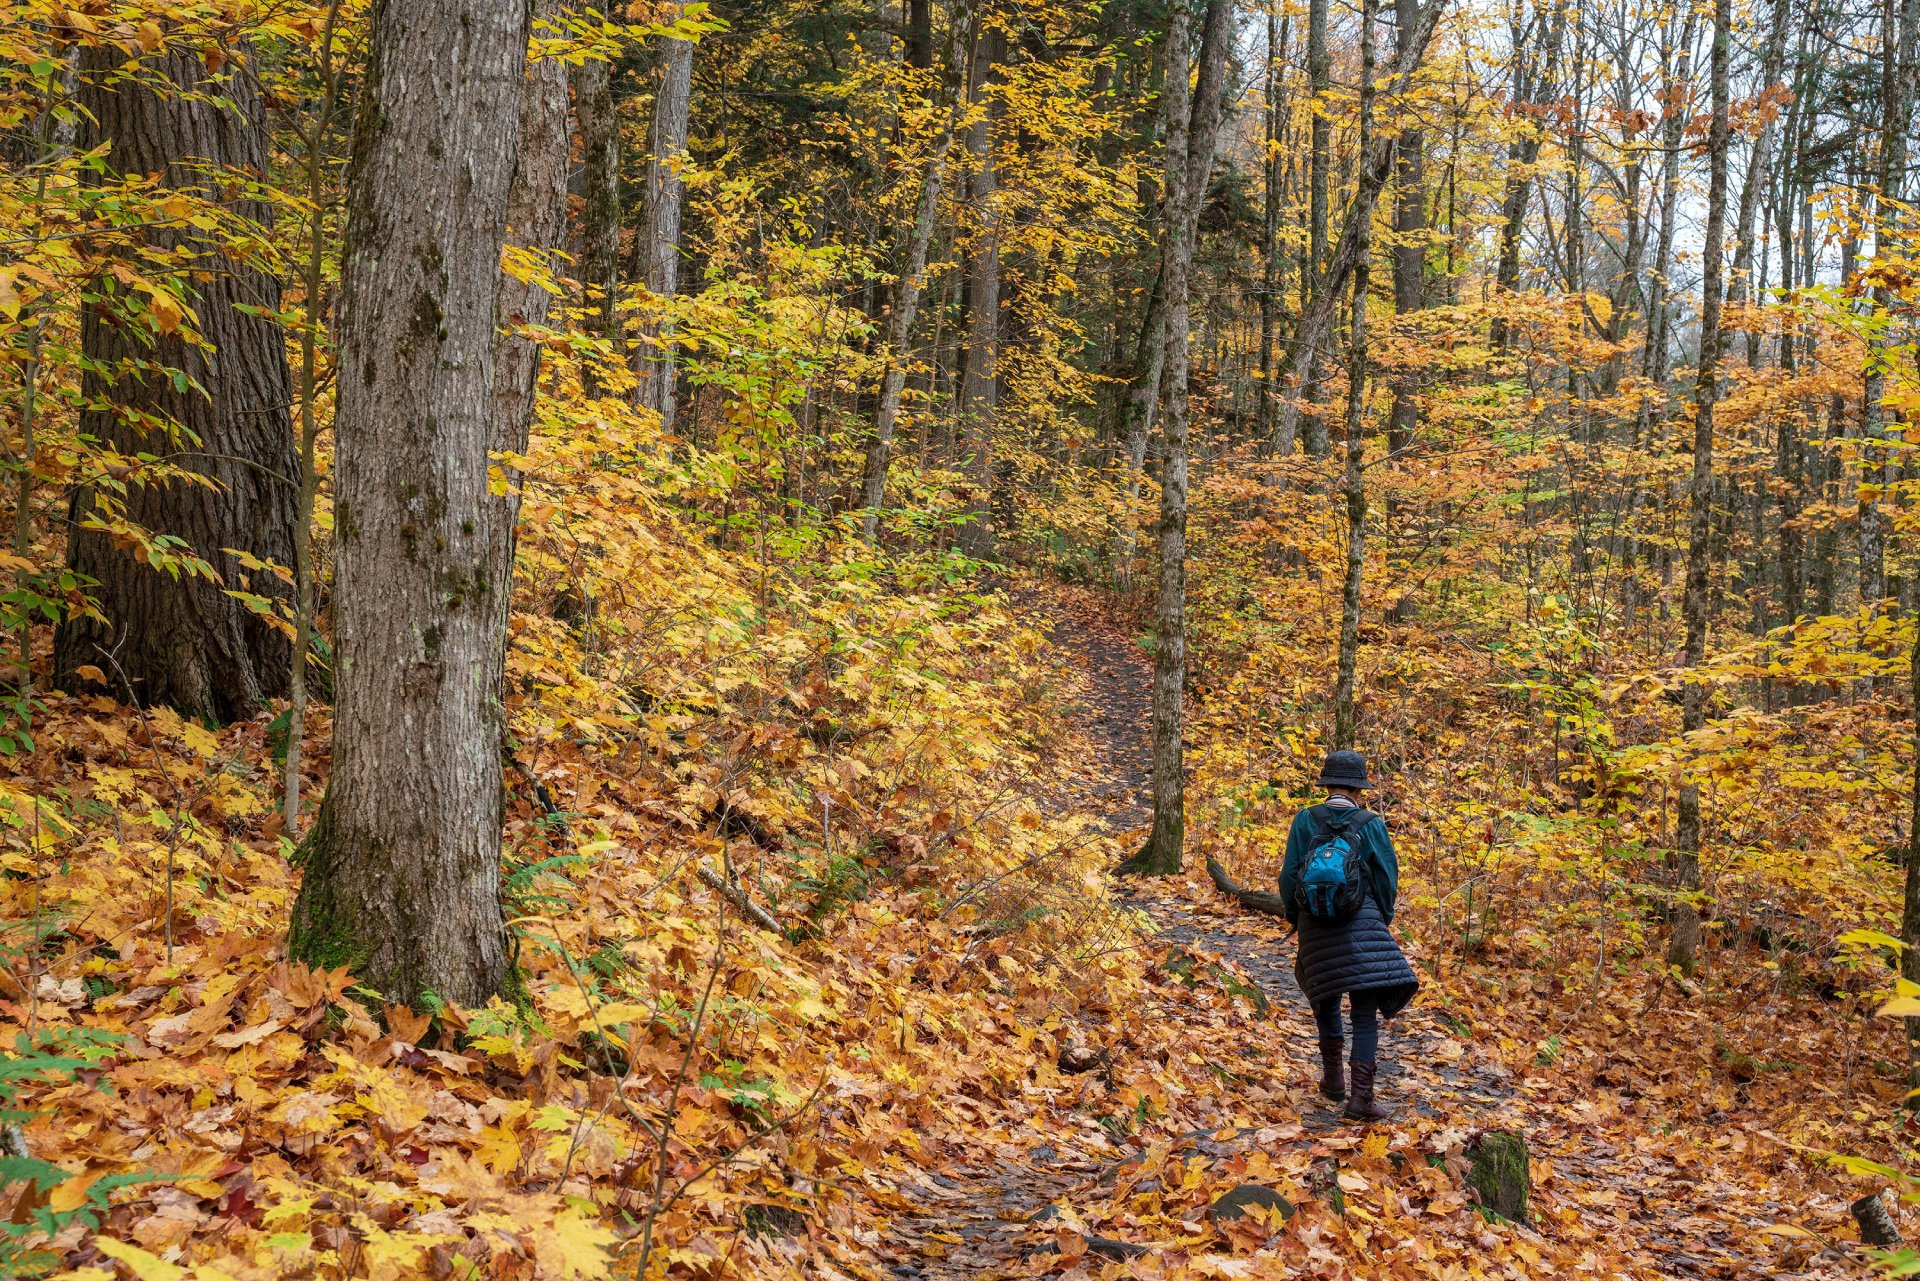 The Leaf Peeper’s Guide to Health and Safety This Fall